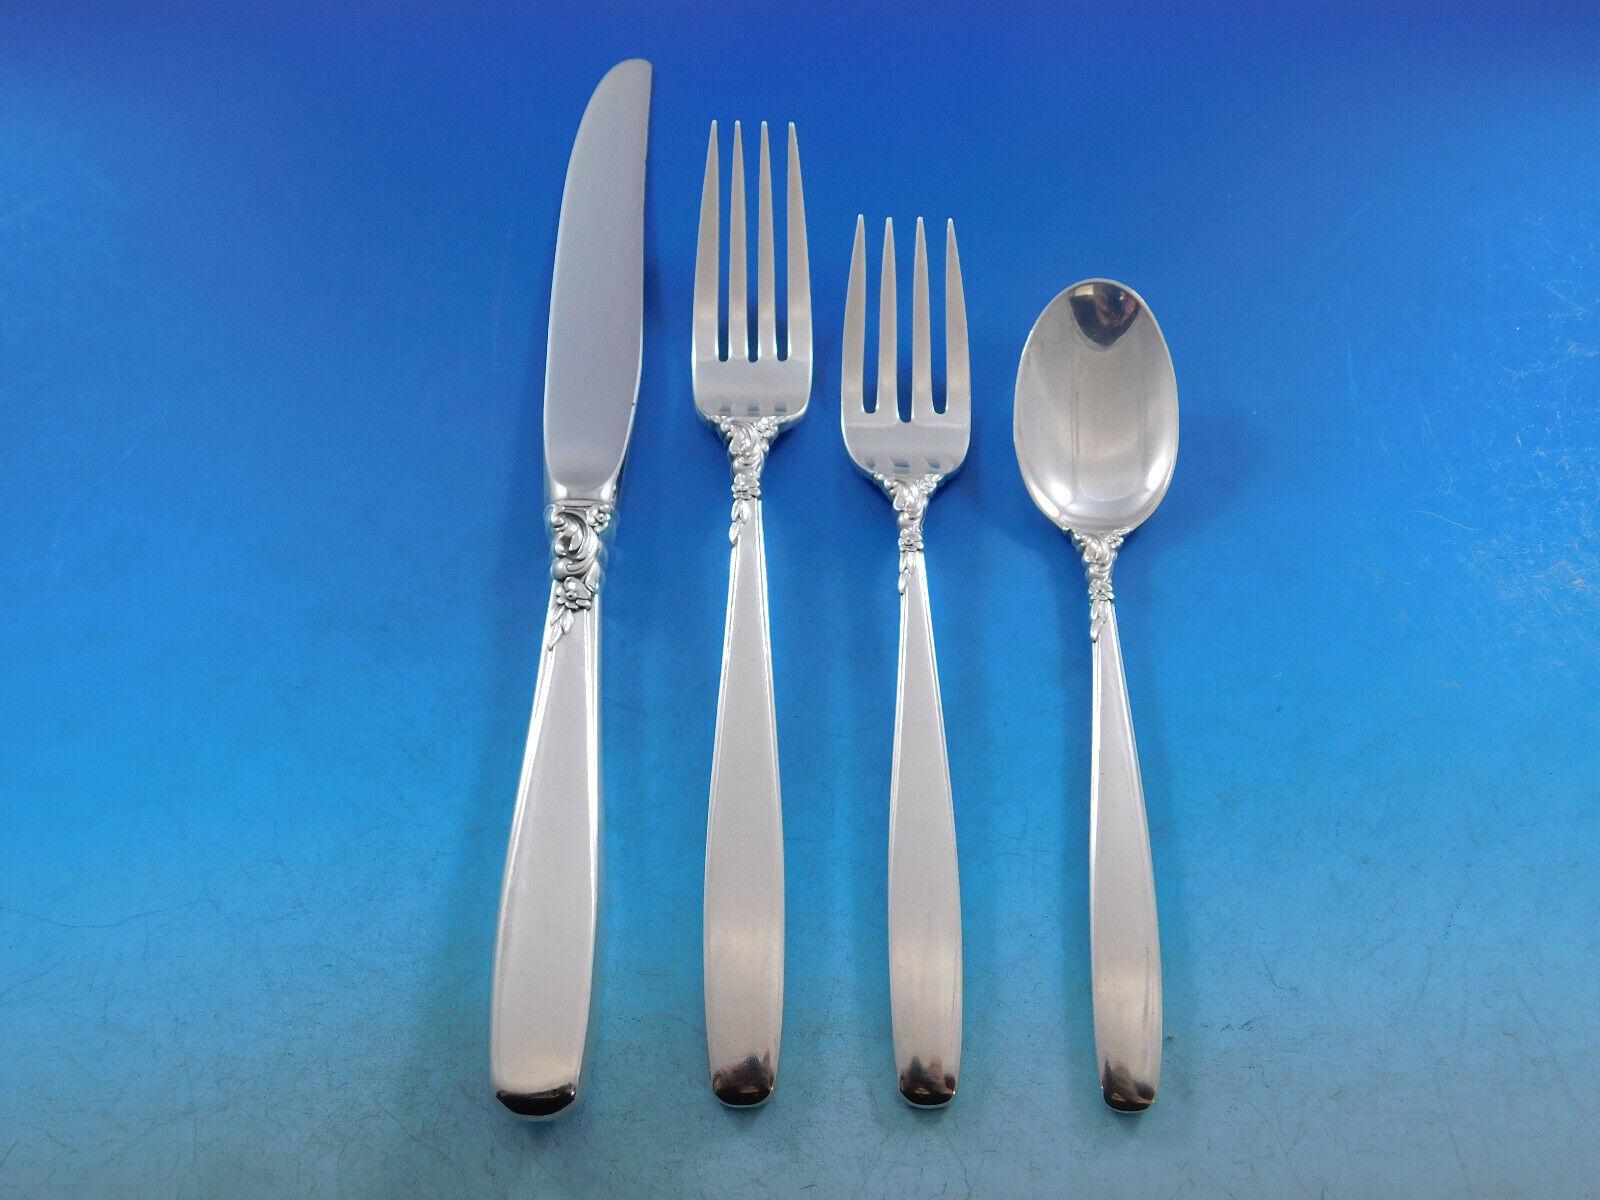 Starfire by Lunt Sterling Silver Flatware set, 44 pieces. This set includes:

8 Knives, 9 1/8